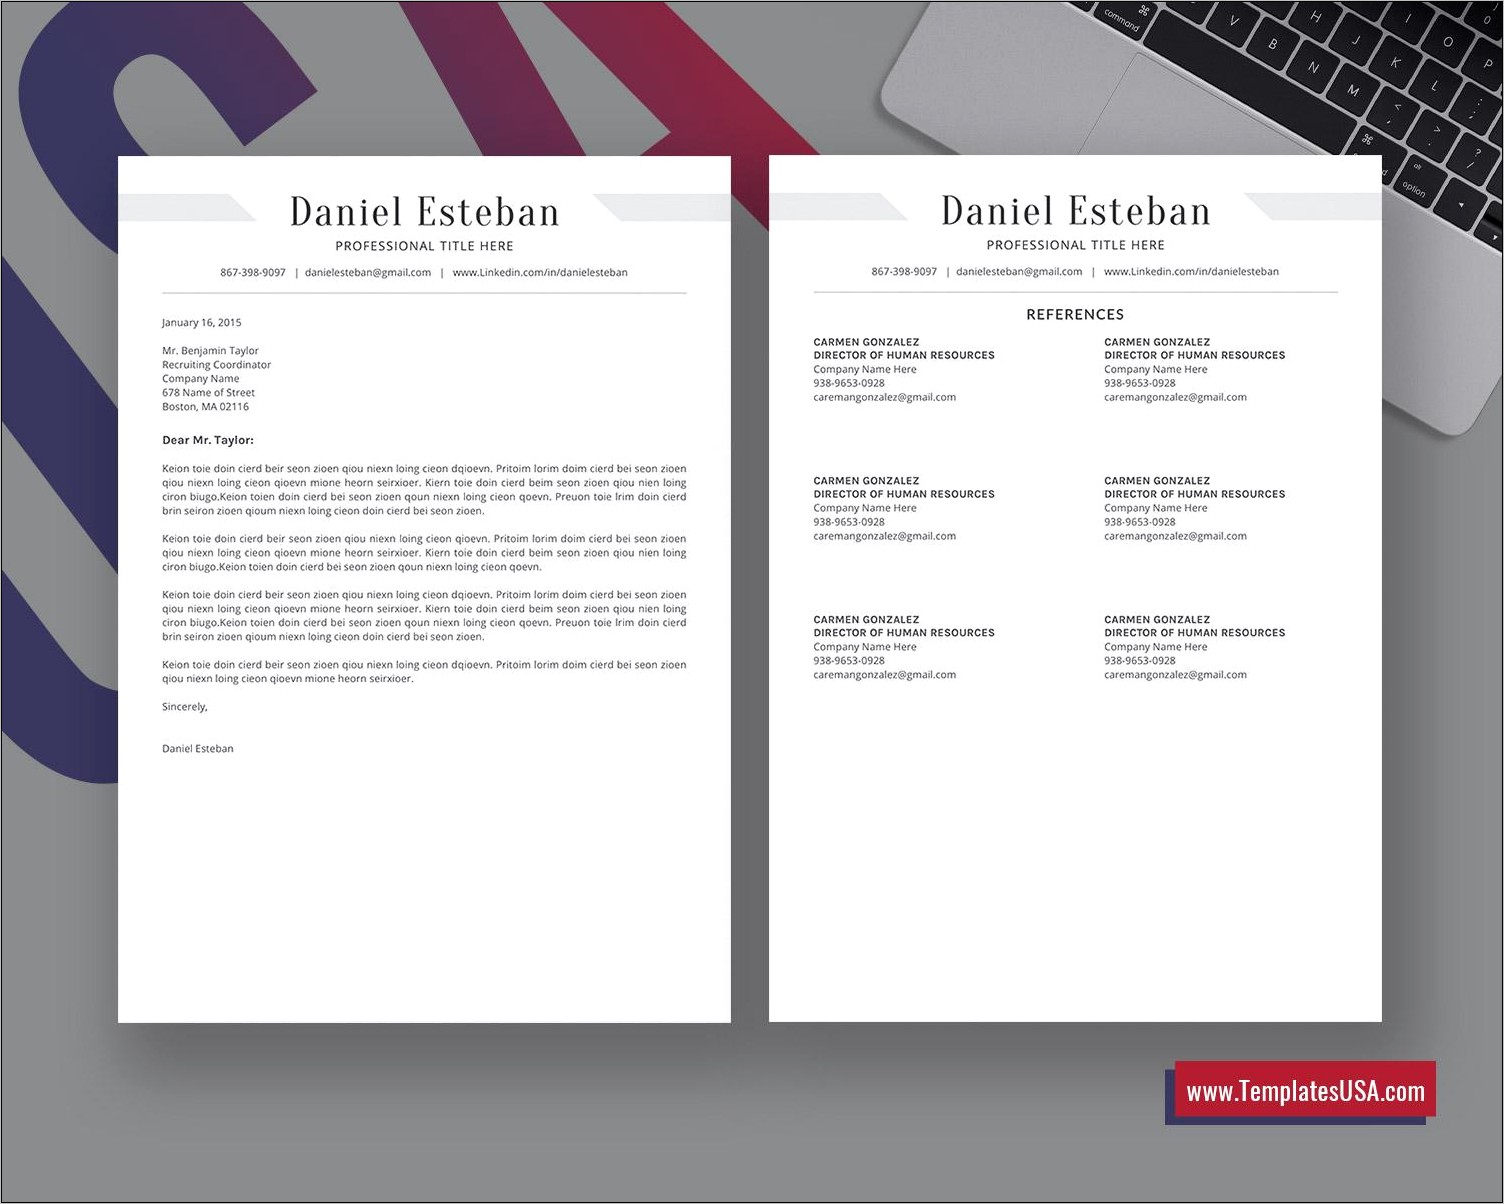 Simple Resume Templates For Jobs